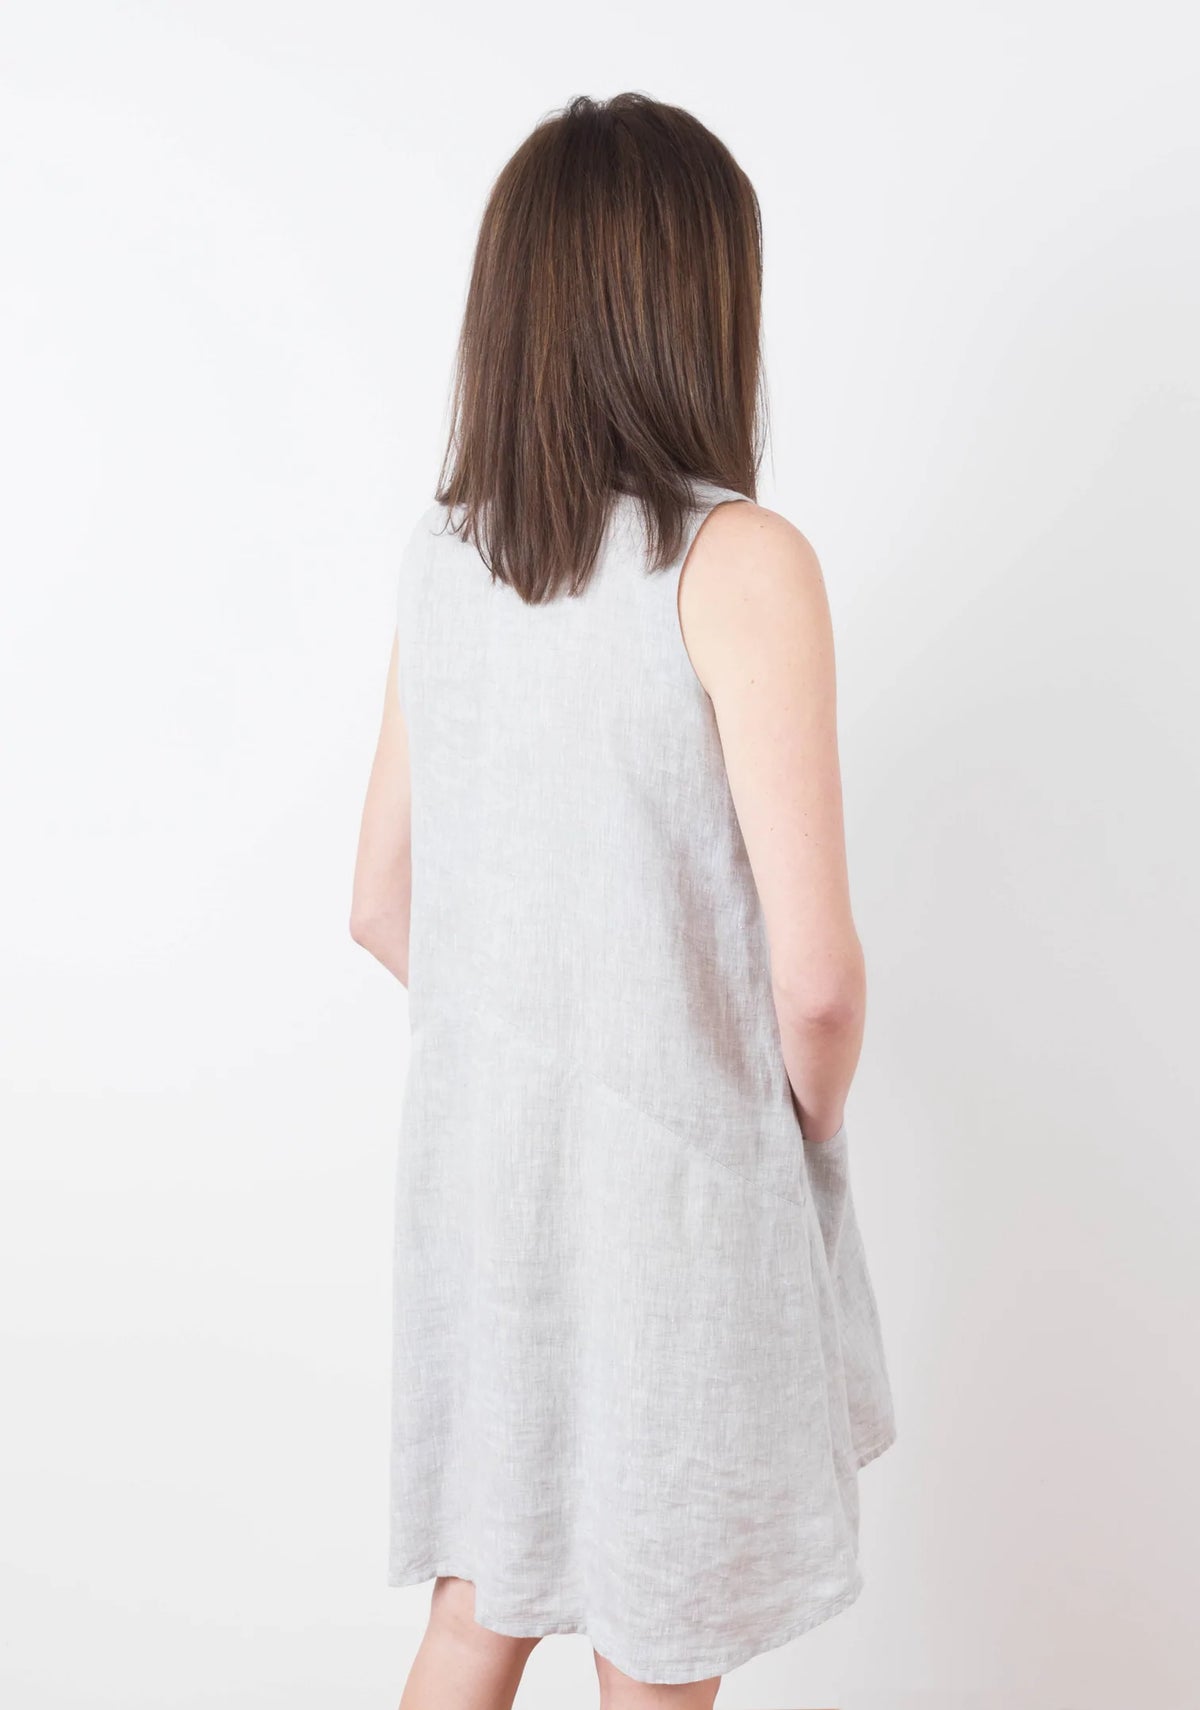 Model Kari is wearing a size 6 Farrow in a light colored linen fabric, back view sleeveless with pockets.